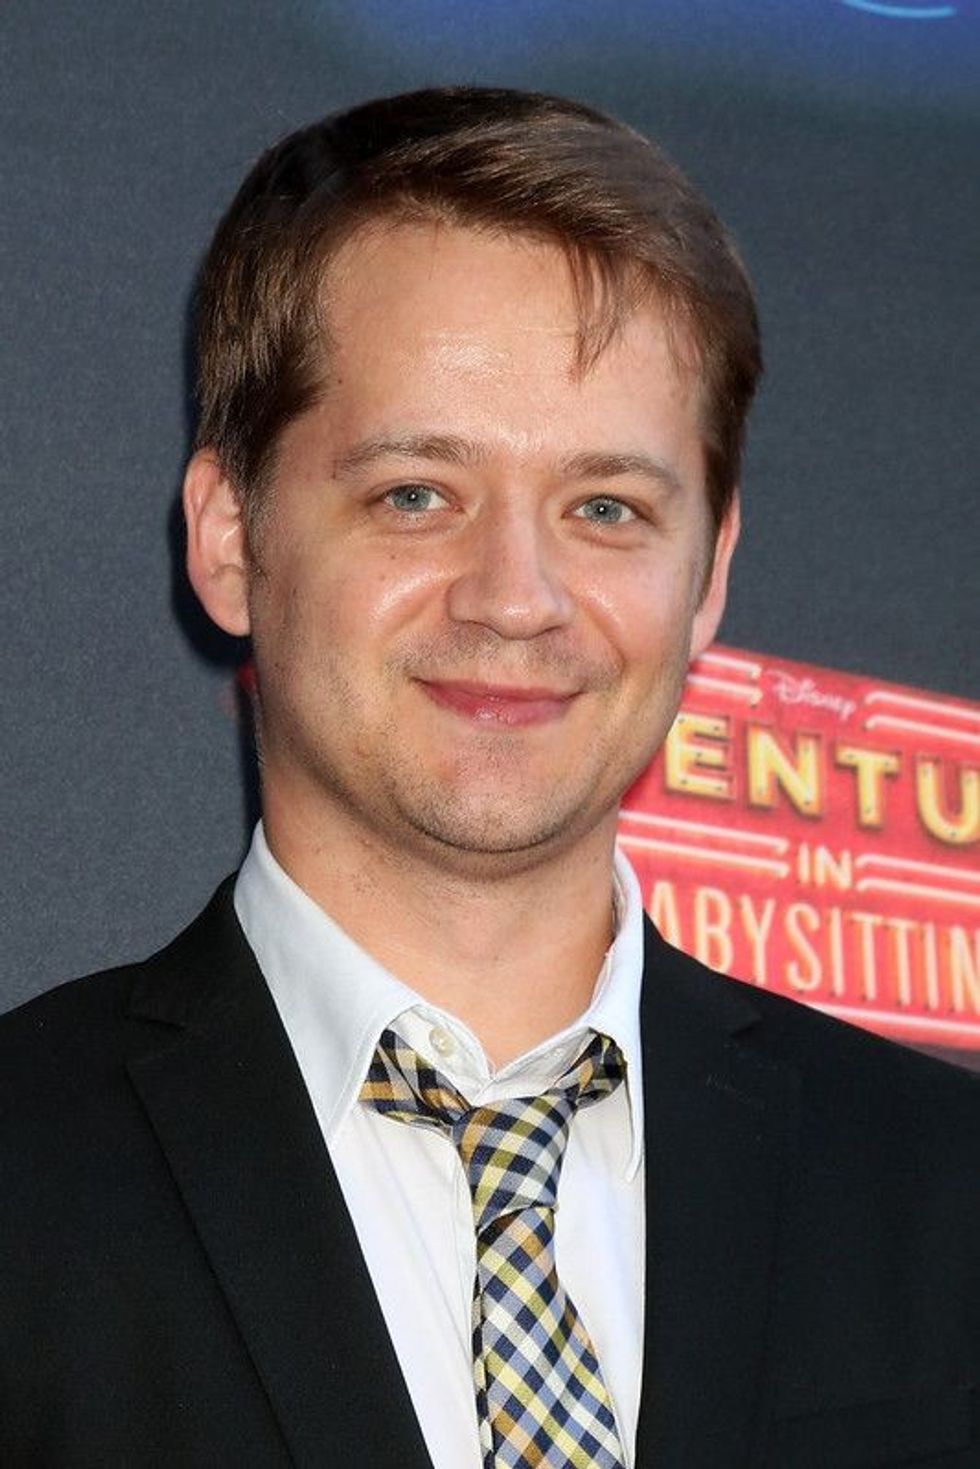 Read these facts about Jason Earles and know more about this television actor and Teen Choice Award nominee.